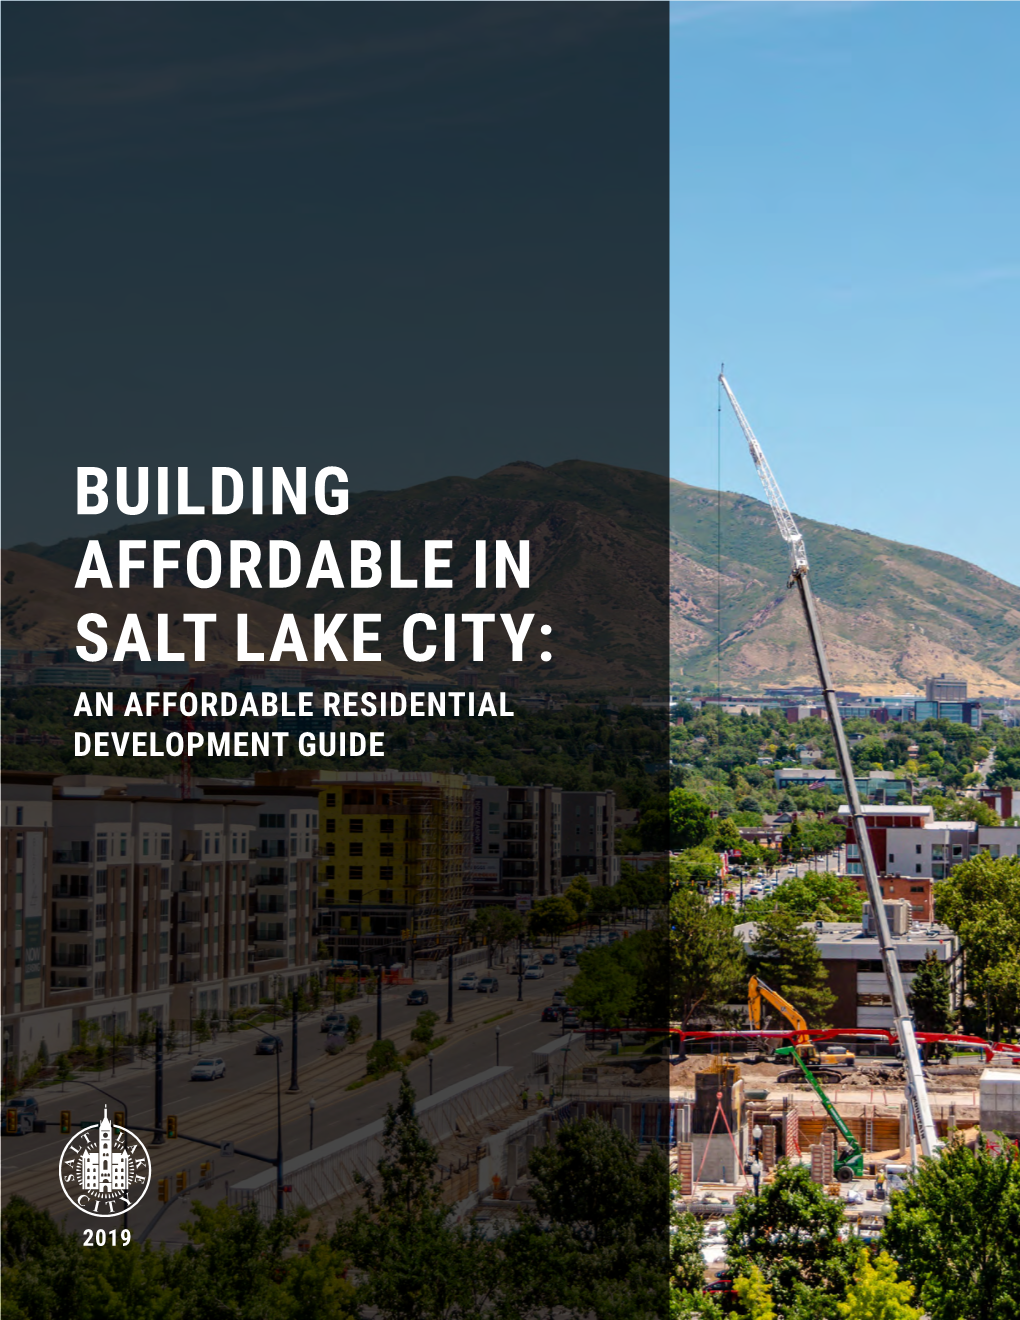 Building Affordable in Salt Lake City: an Affordable Residential Development Guide